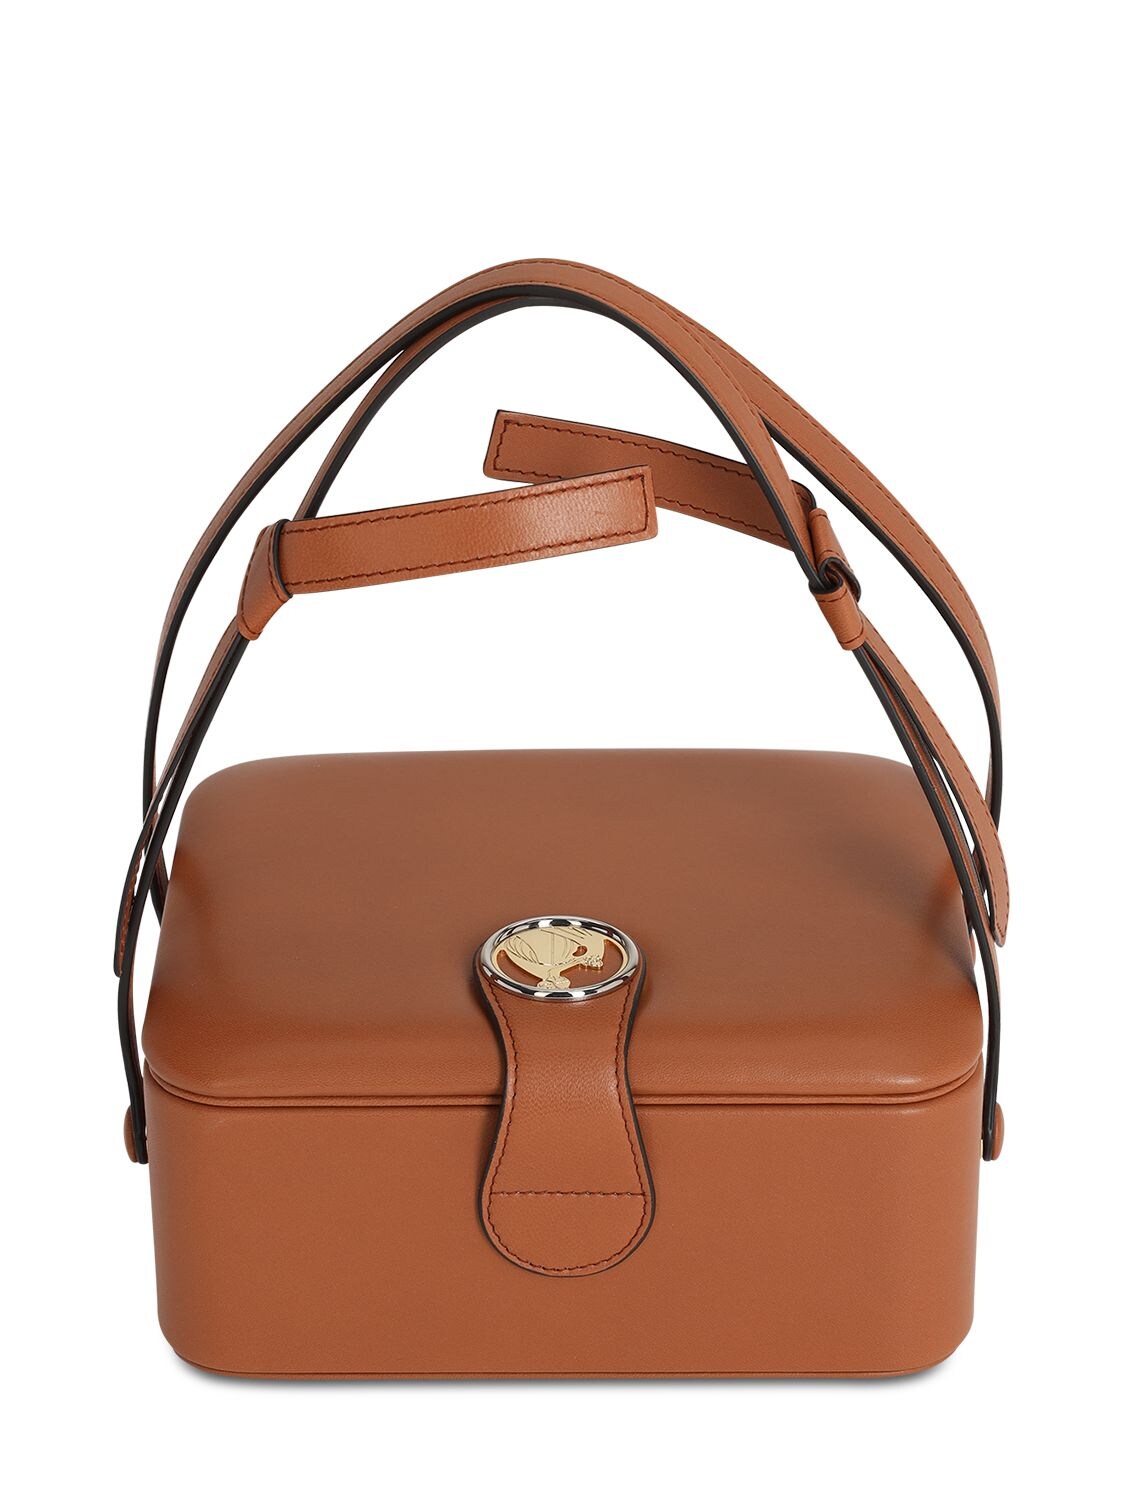 Lanvin Bento Box Leather Top Handle Bag In Brown